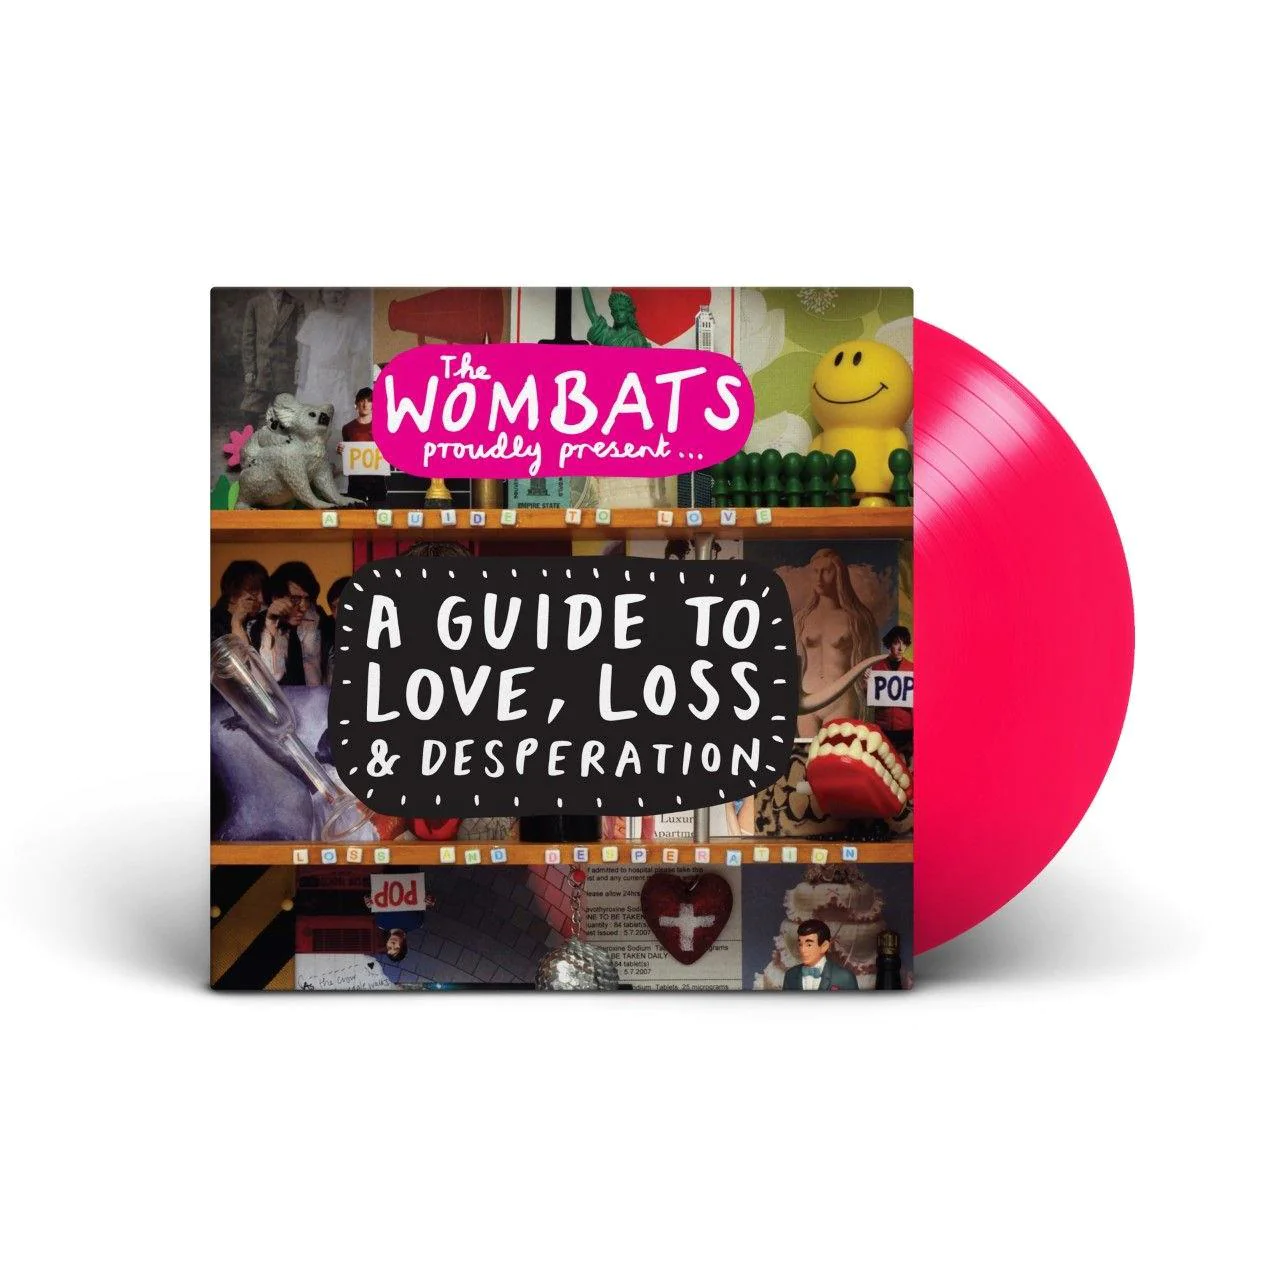 The Wombats - A Guide To Love, Loss & Desperation (Pink Vinyl)